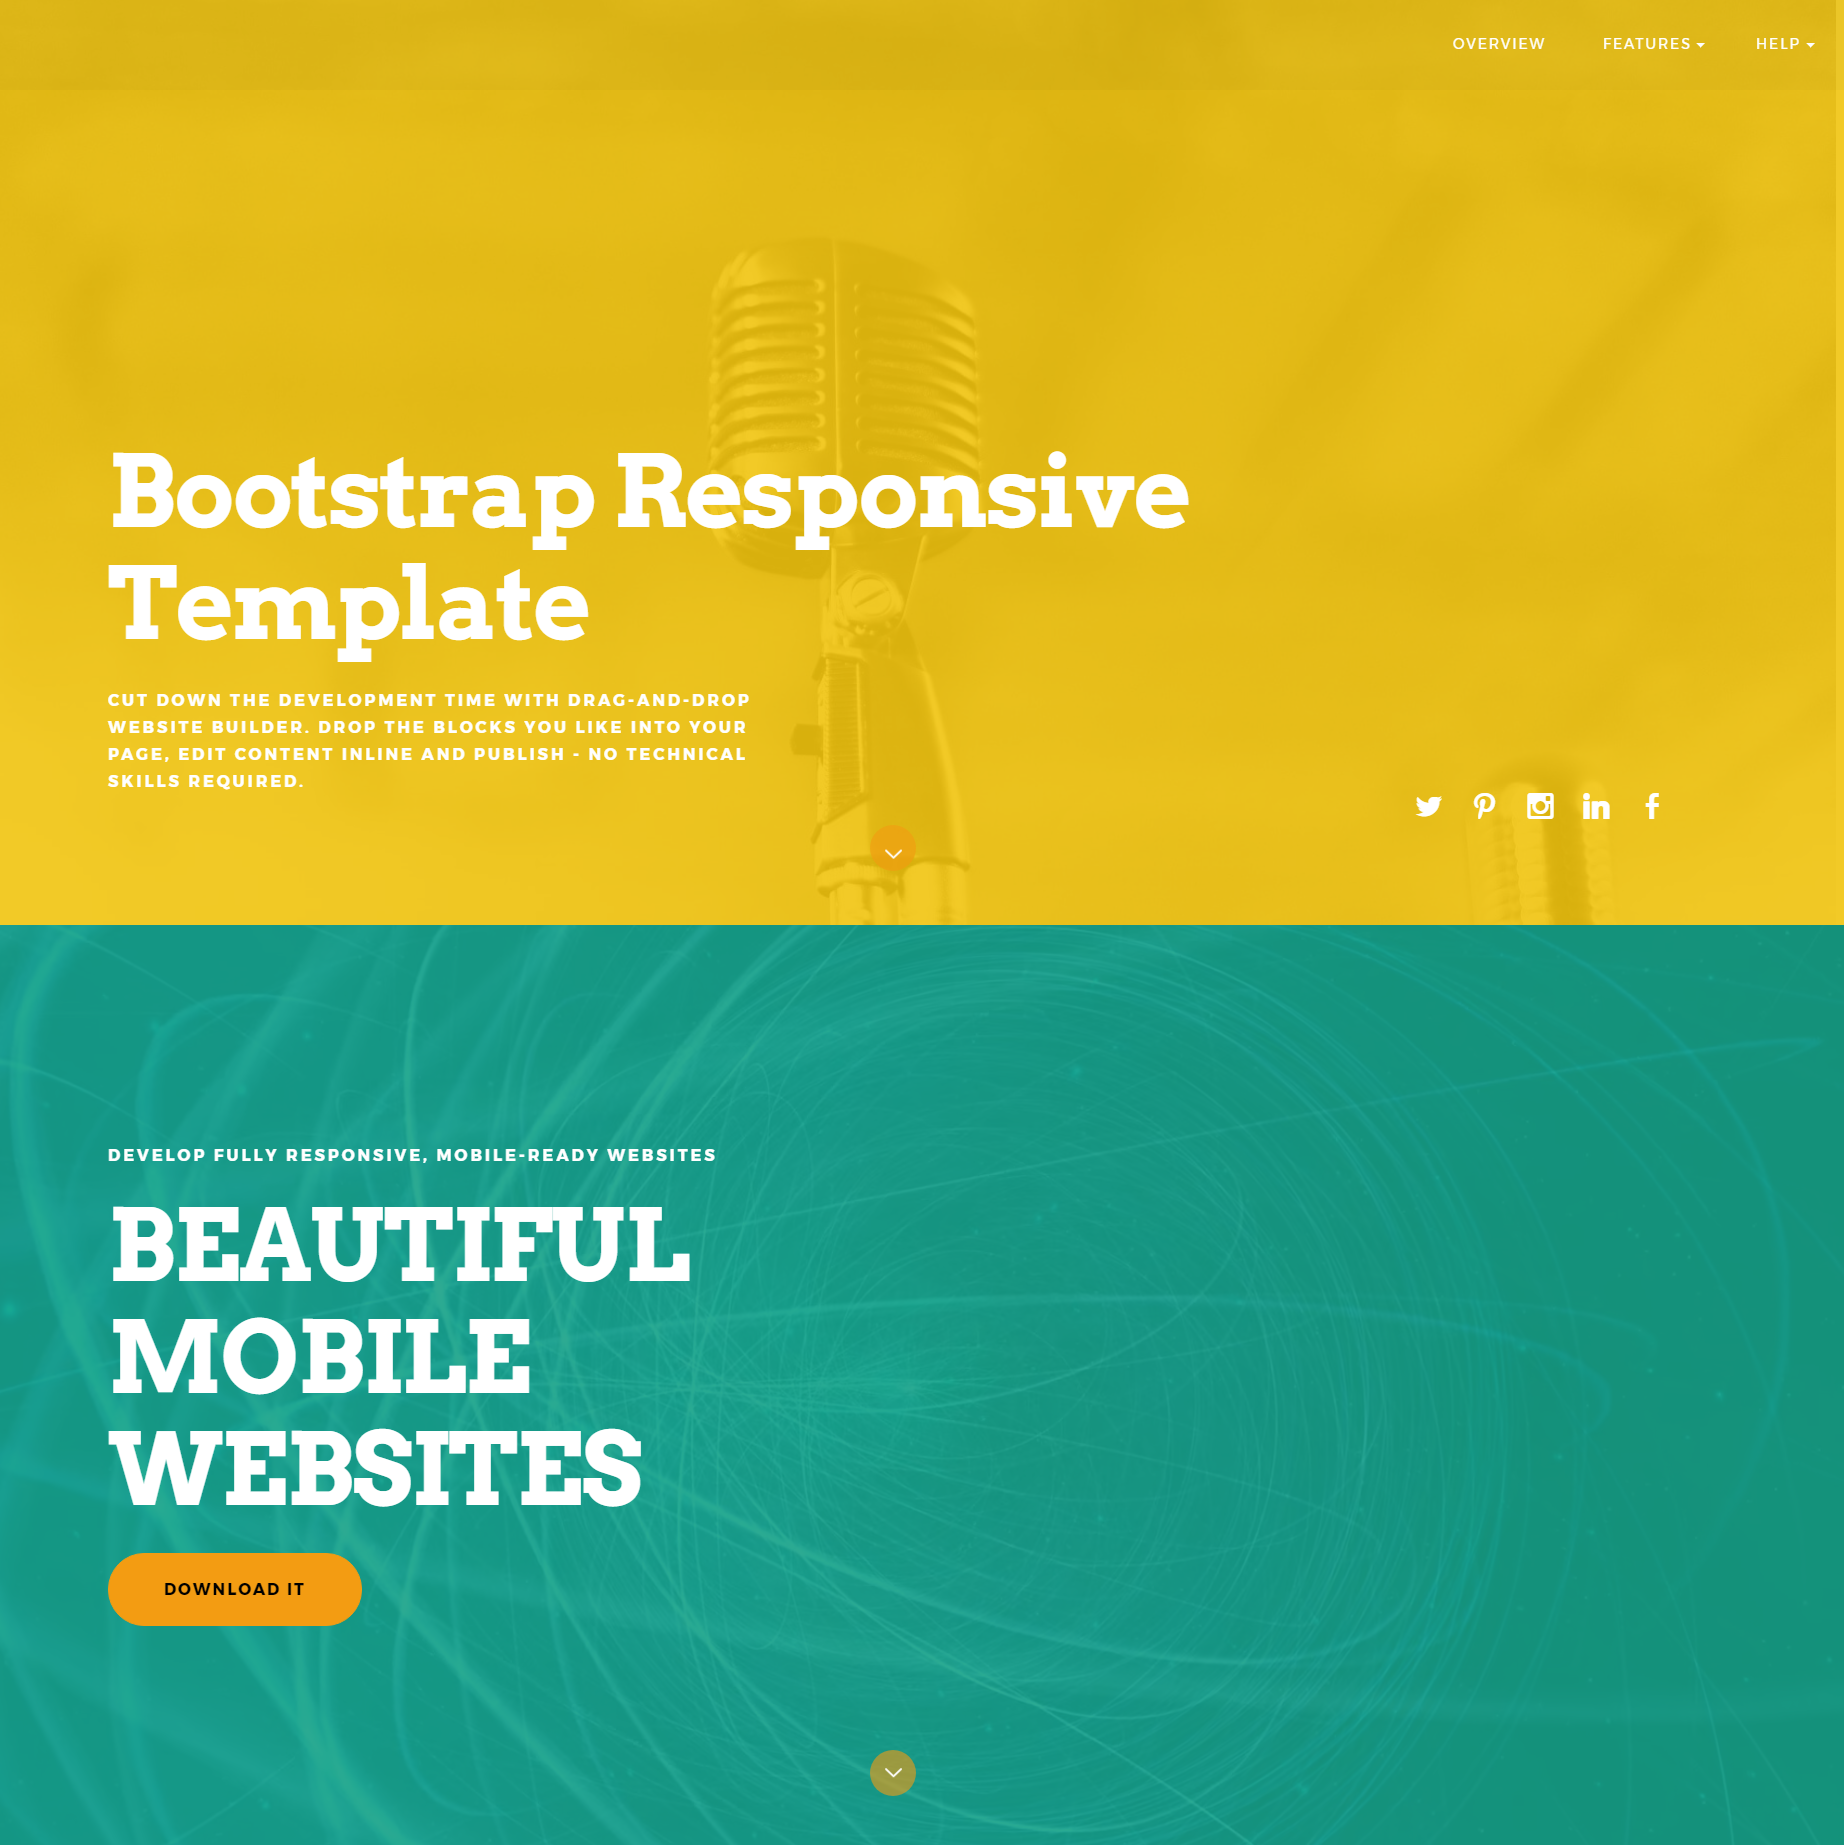 HTML5 Bootstrap Responsive Templates